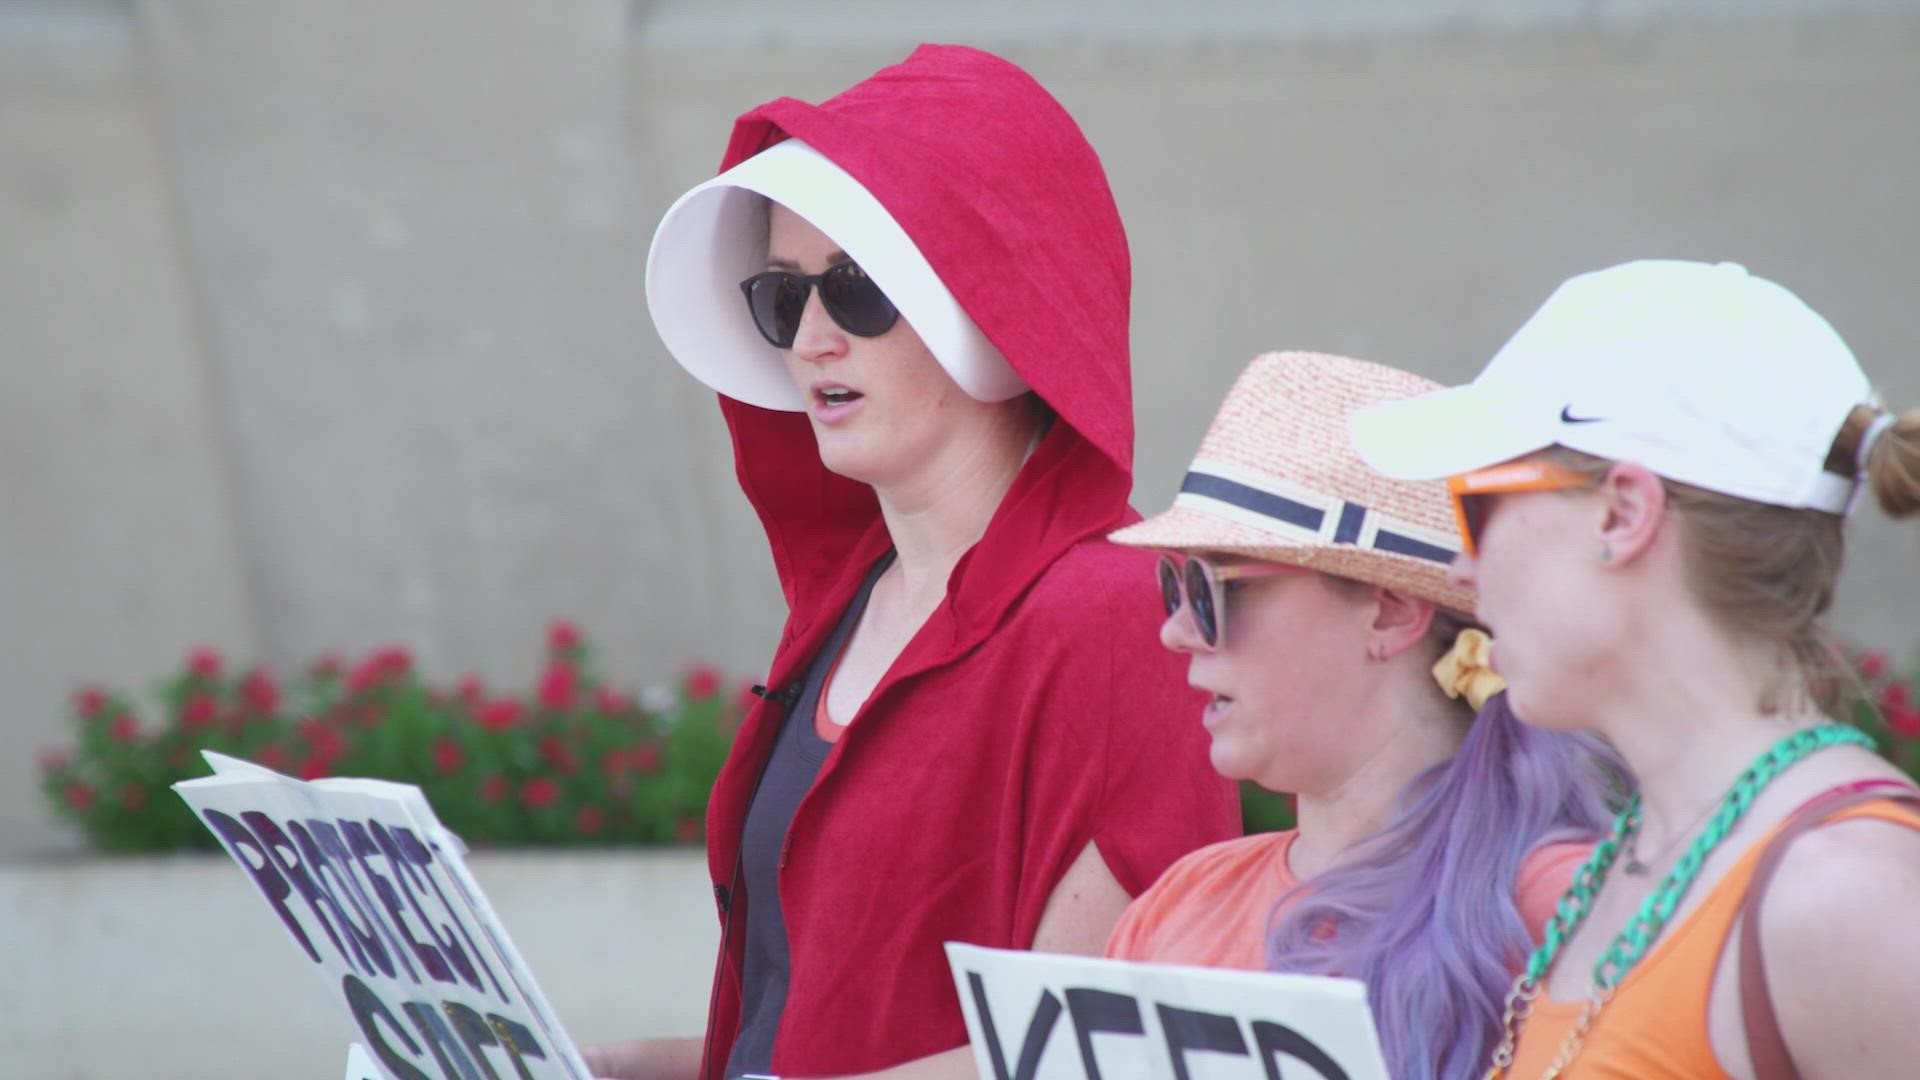 “If any of you have watched The Handmaid’s Tale, or read the book, that’s where we are living today,” said Lauren, pro-choice advocate.